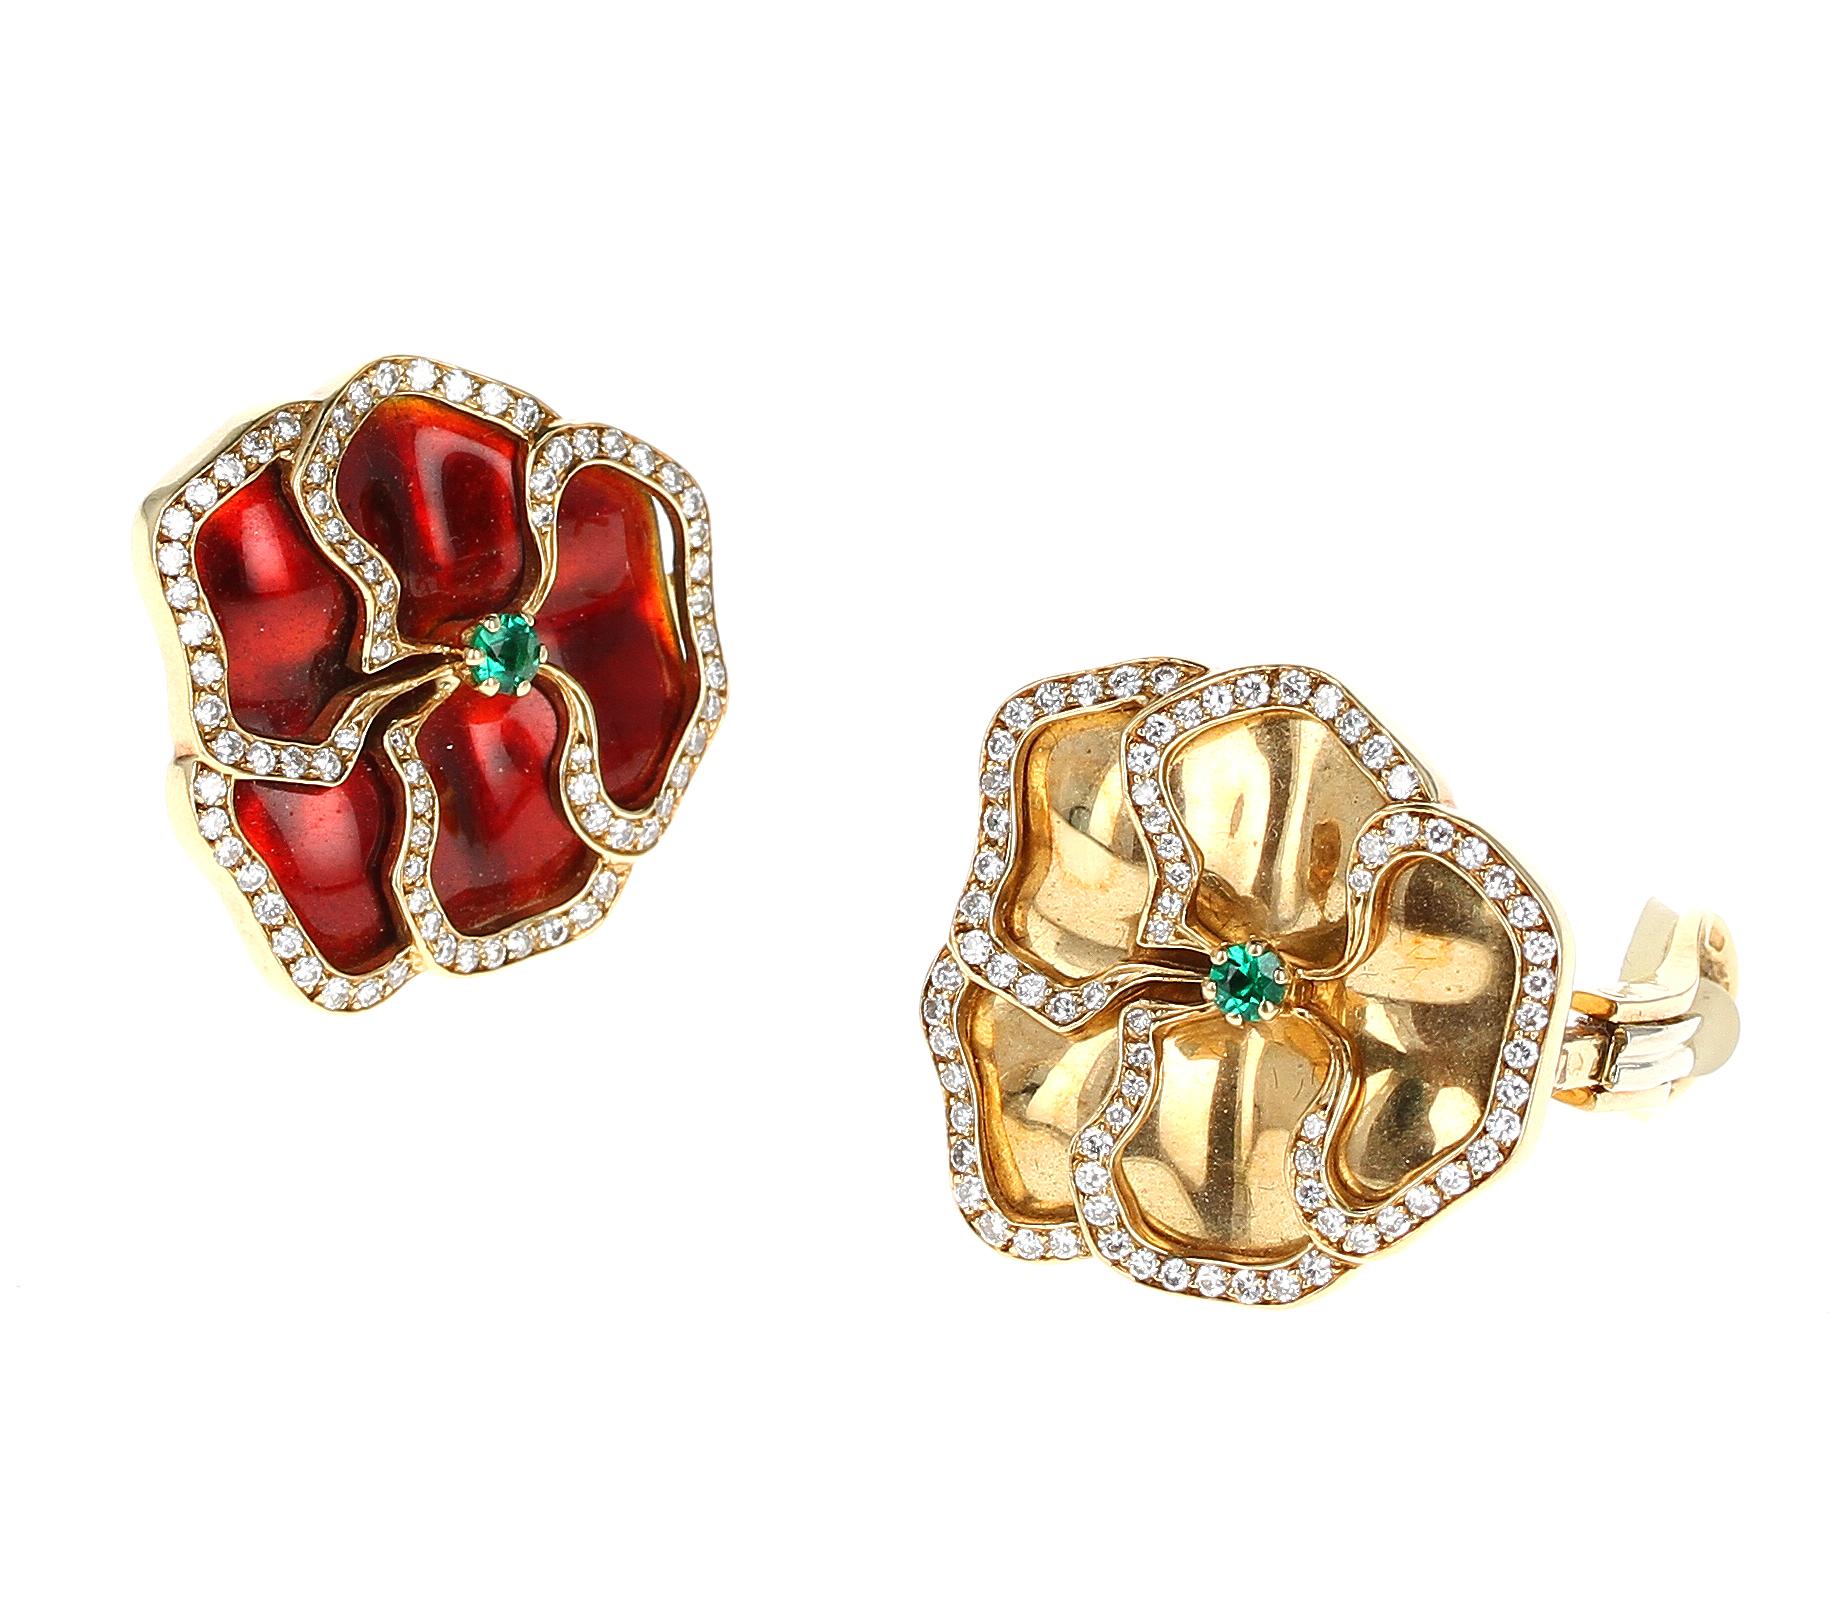 A stylish asymmetrical floral pair of enameled earrings- one red and one yellow with yellow gold. The center of the flower is an emerald cut stone and the leaves are outlined with diamonds. 